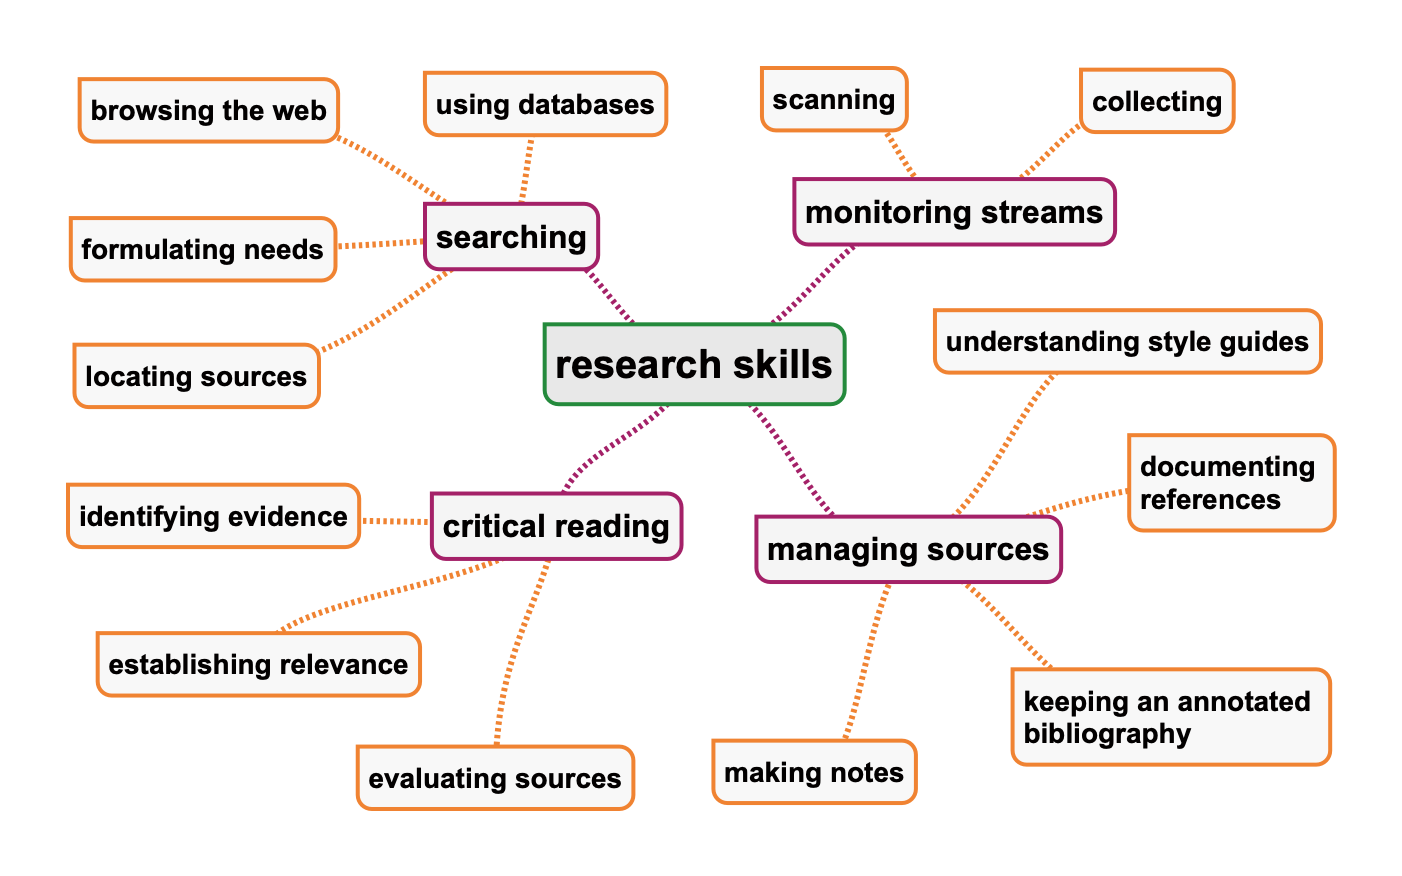 proposed research skills examples